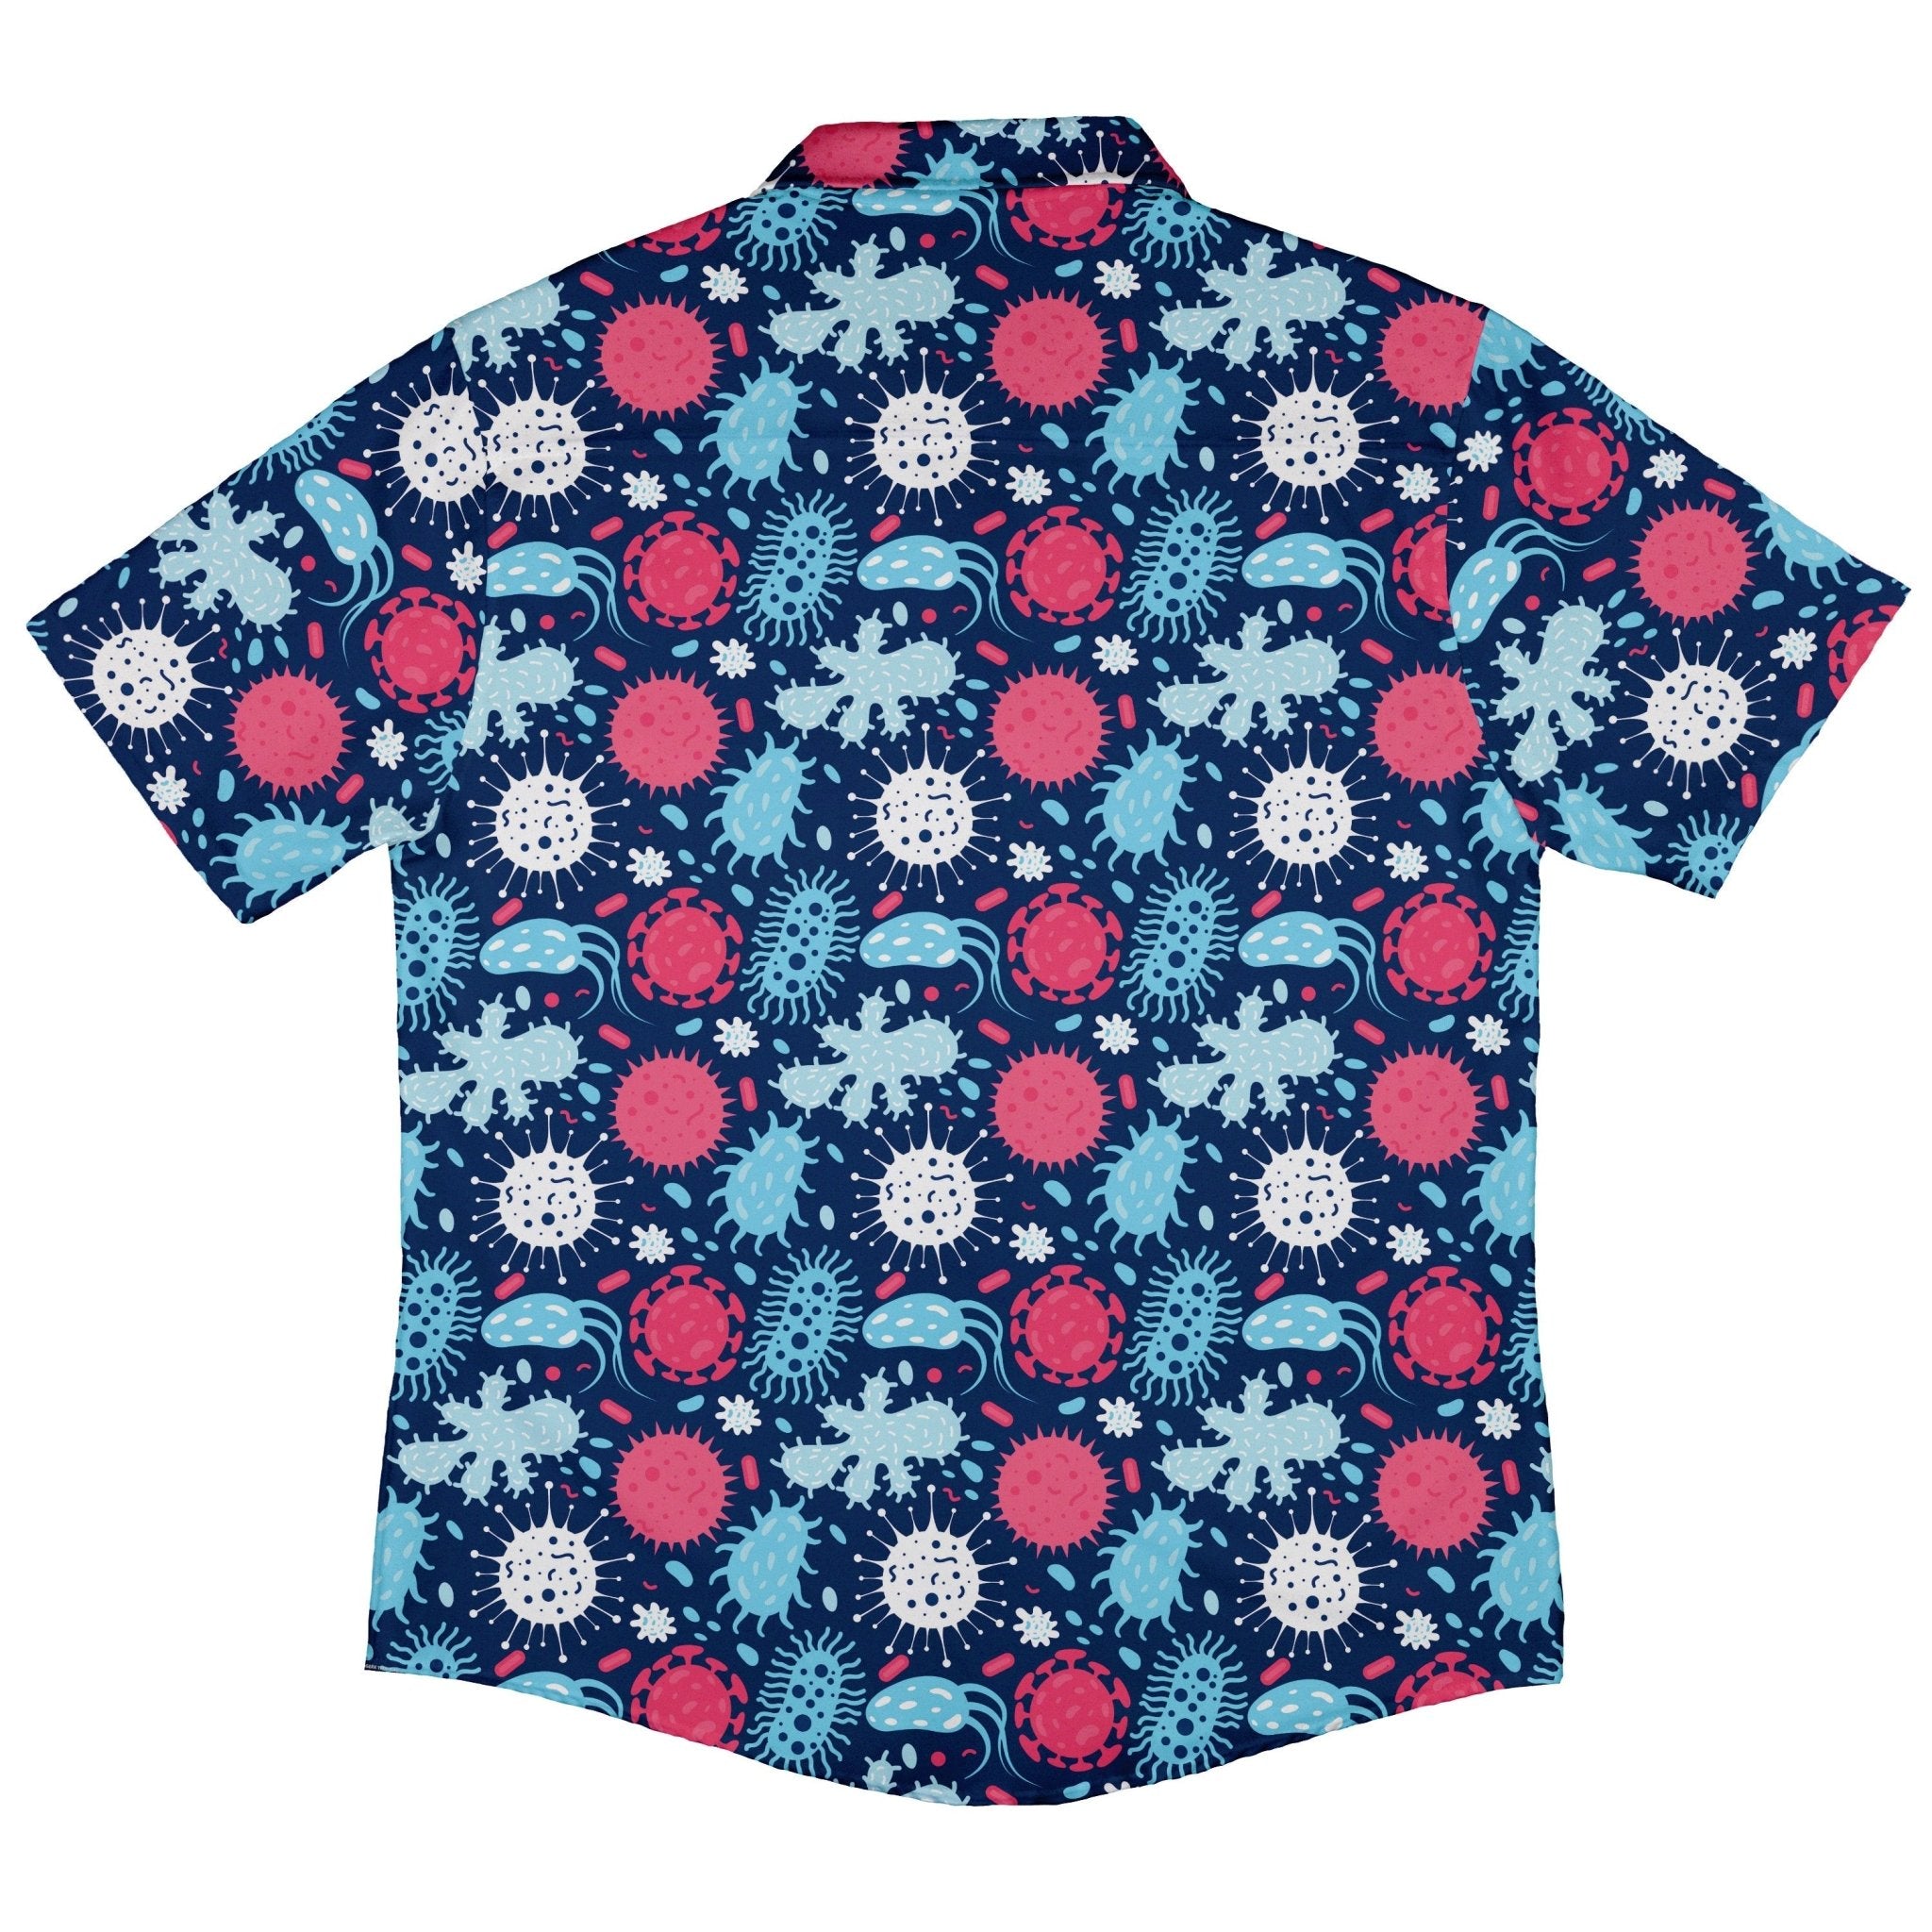 Microscopic Collection Blue Science Biology Button Up Shirt - adult sizing - Maximalist Patterns - science print